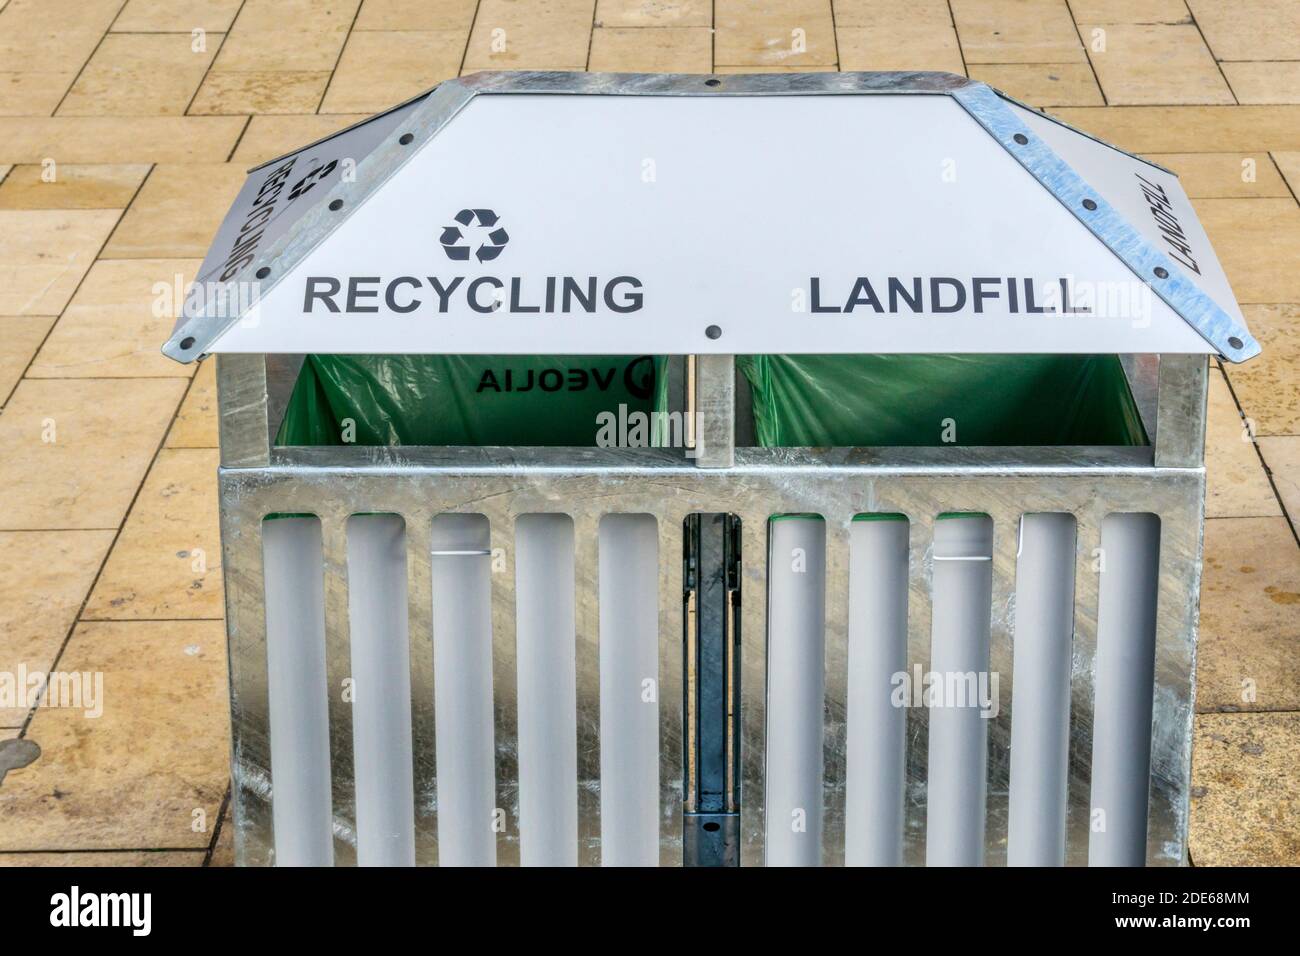 A straightforward choice between recycling and landfill on a litter bin in Brixton, South London. Stock Photo